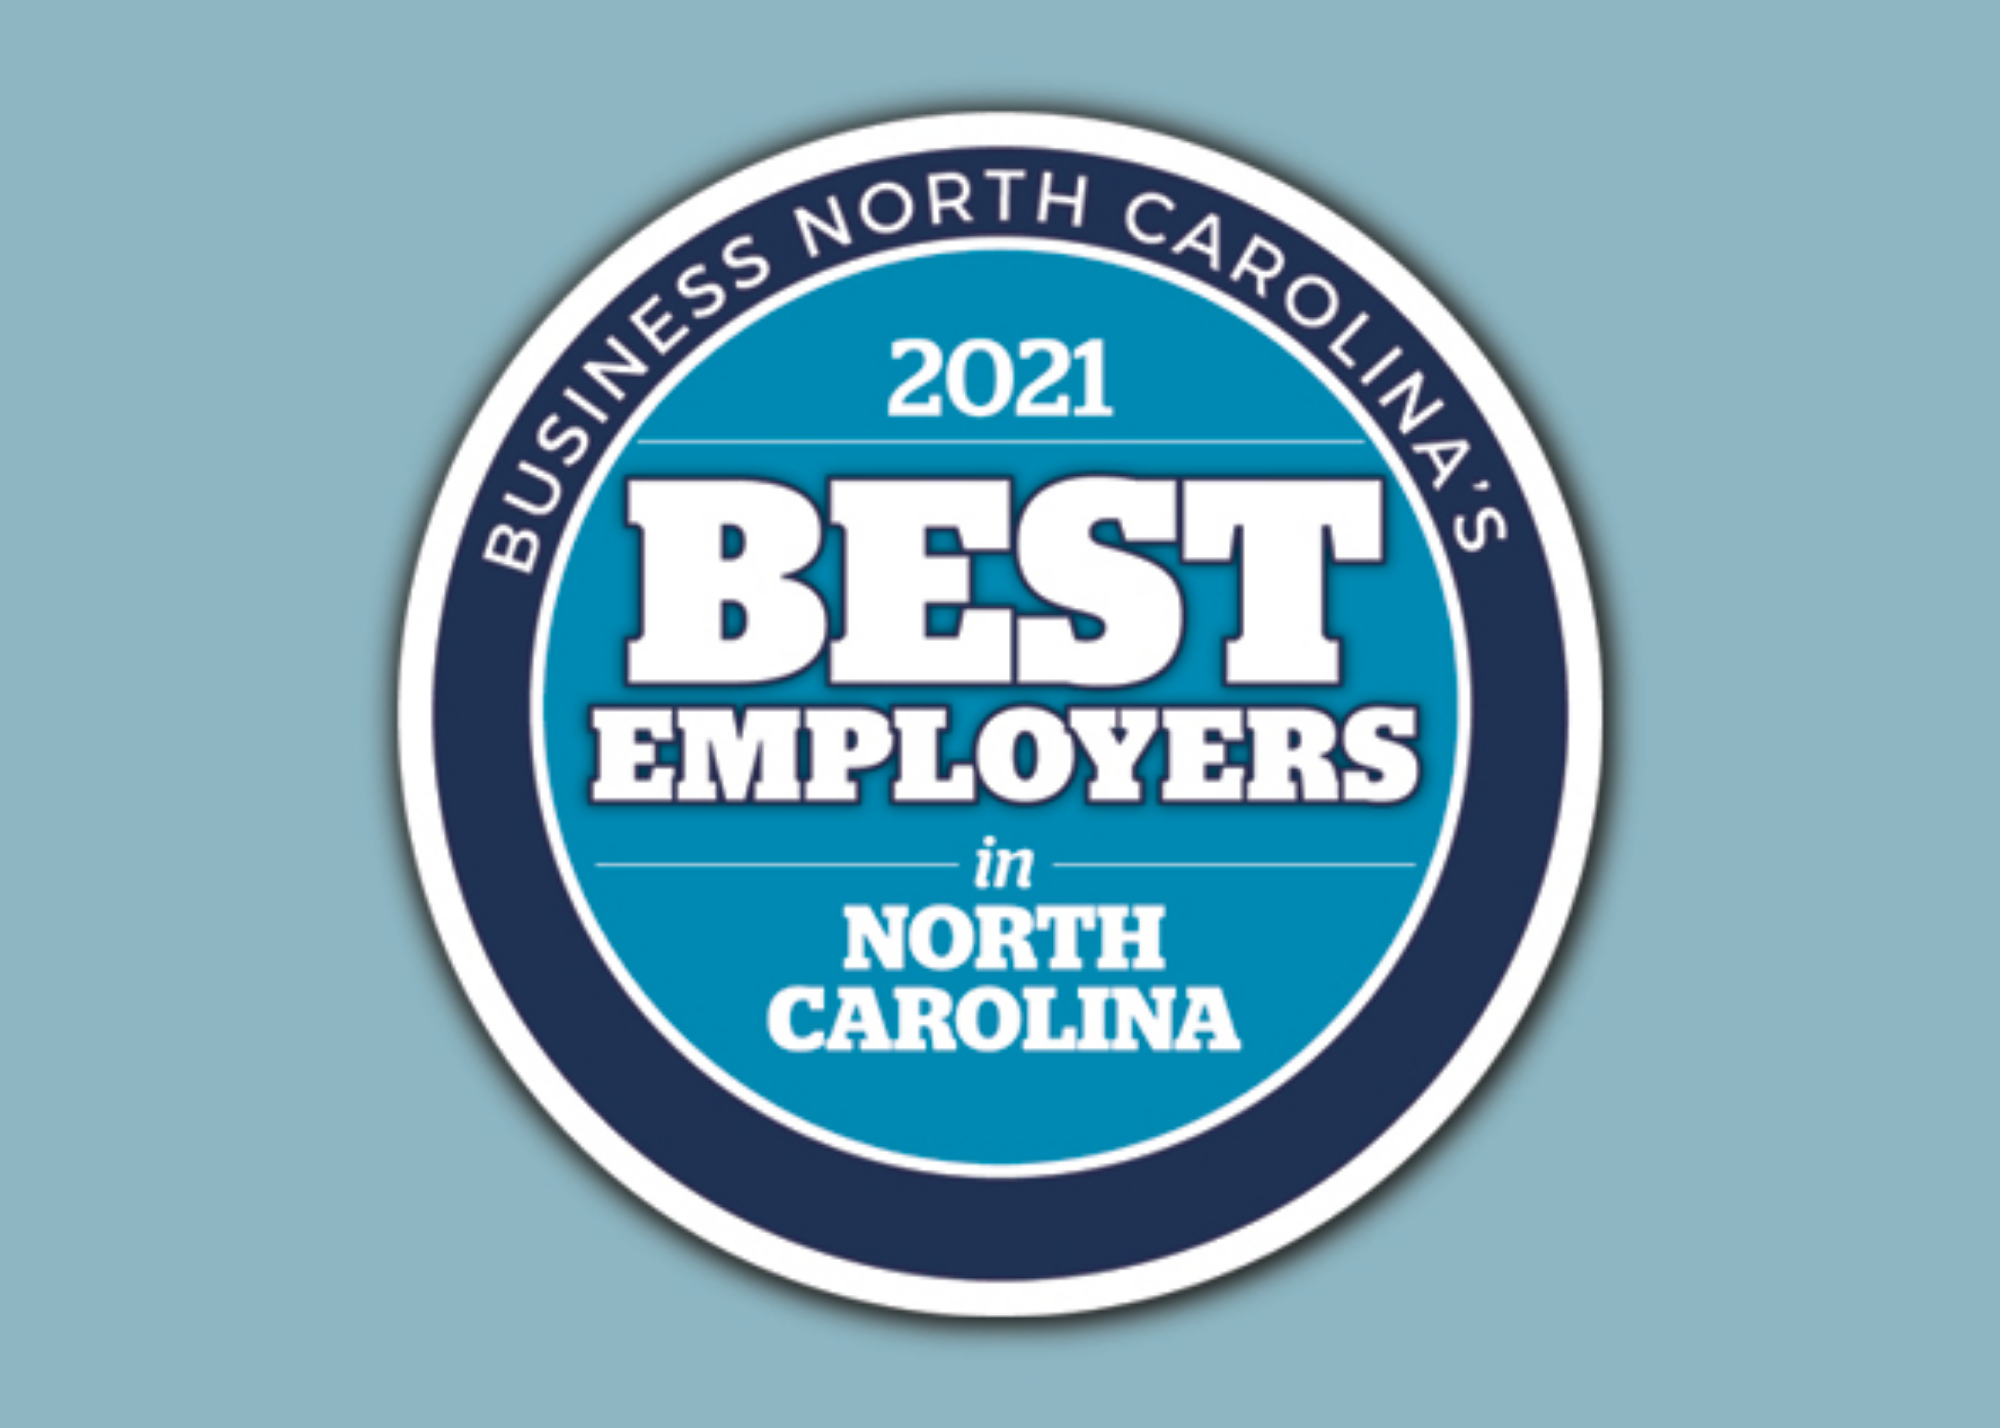 All American Entertainment Named a 2021 Best Employer in North Carolina